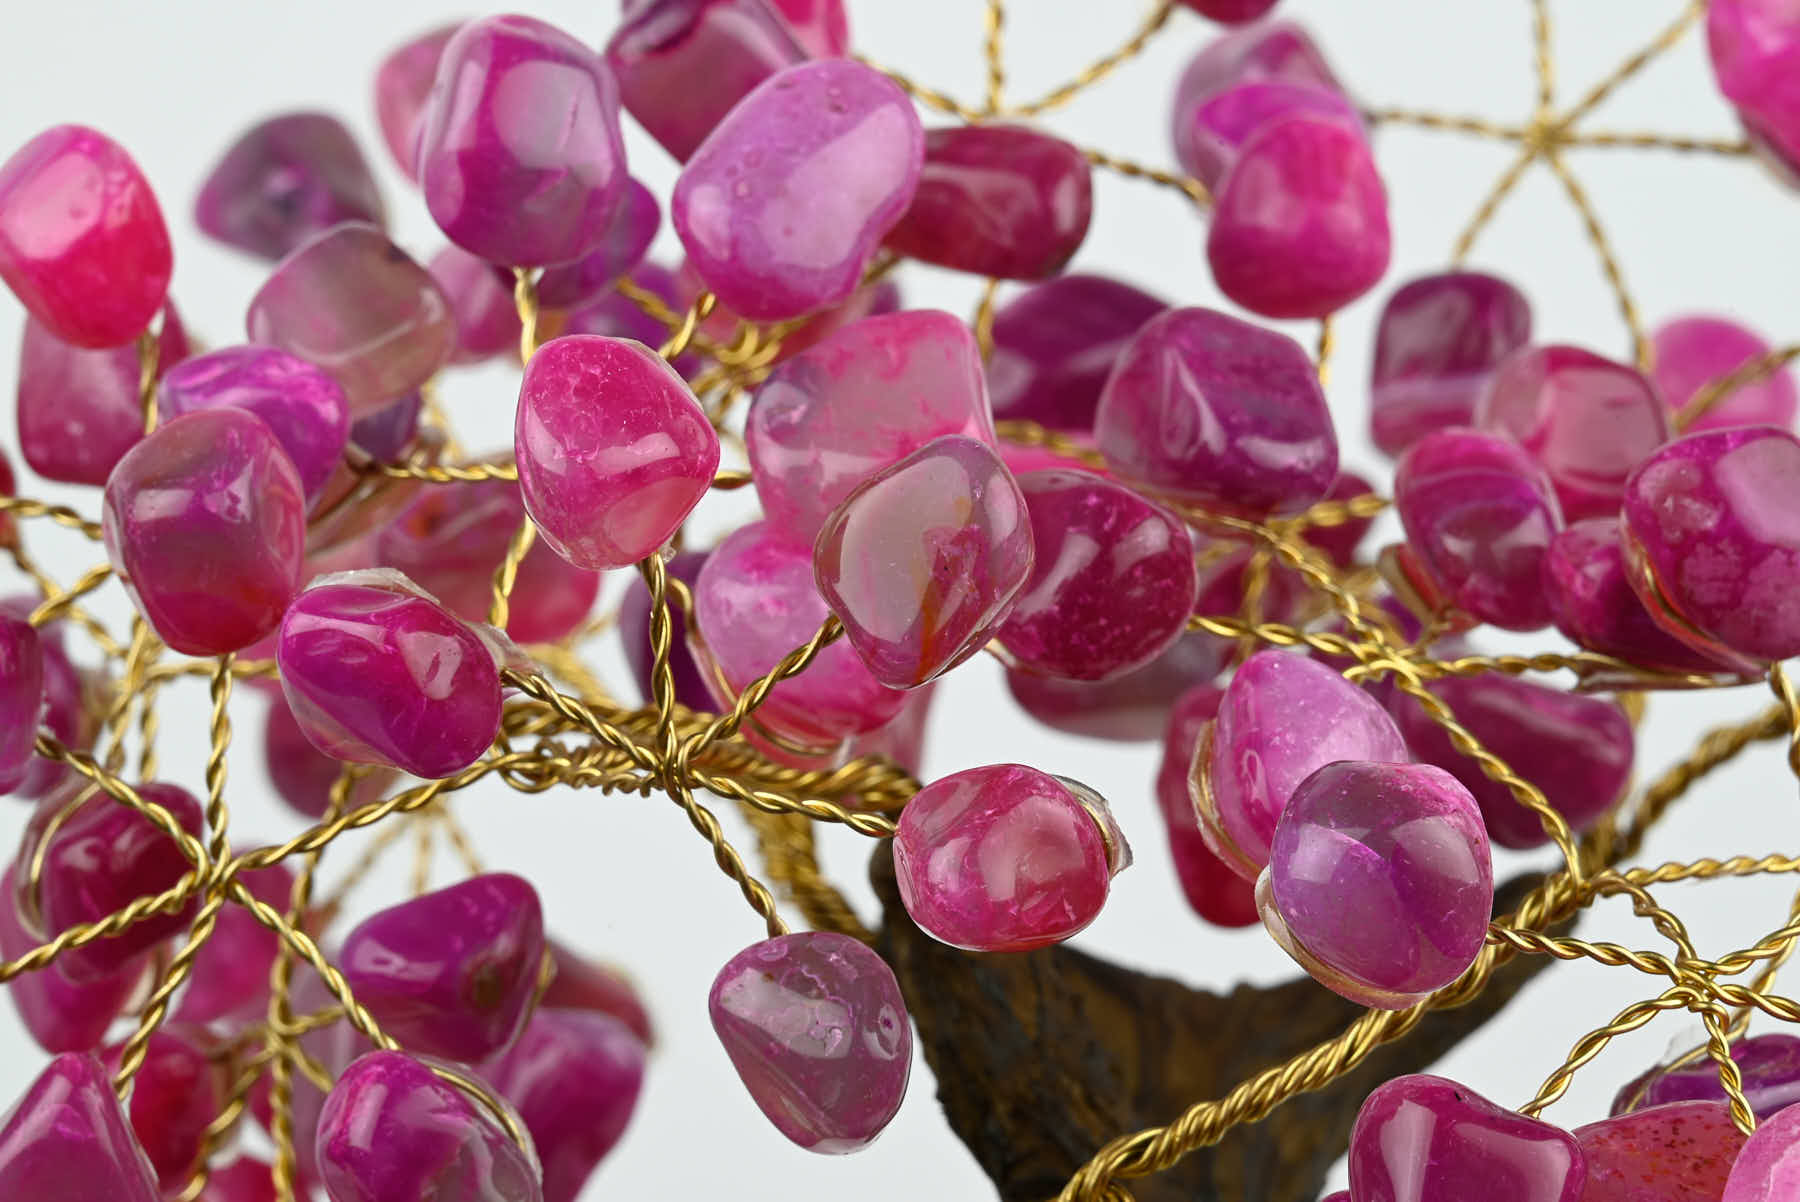 46cm Tall Gemstone Tree with Amethyst base and 240 Pink Agate gems - #TRPINK-43003